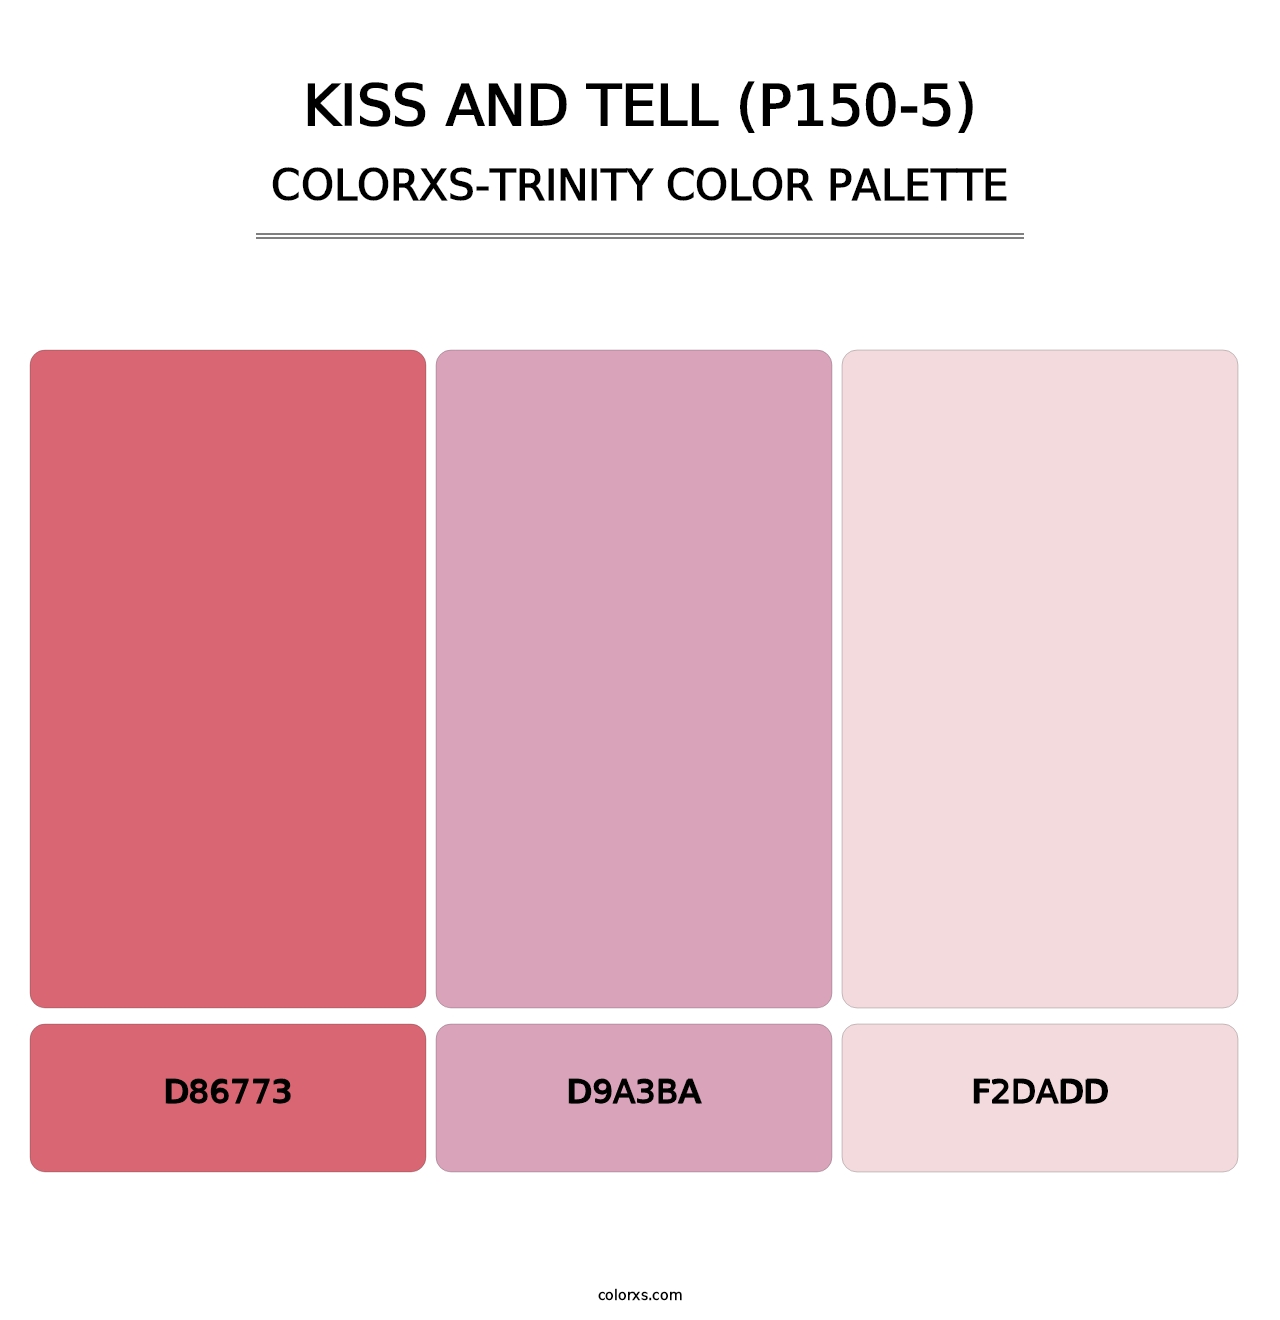 Kiss And Tell (P150-5) - Colorxs Trinity Palette